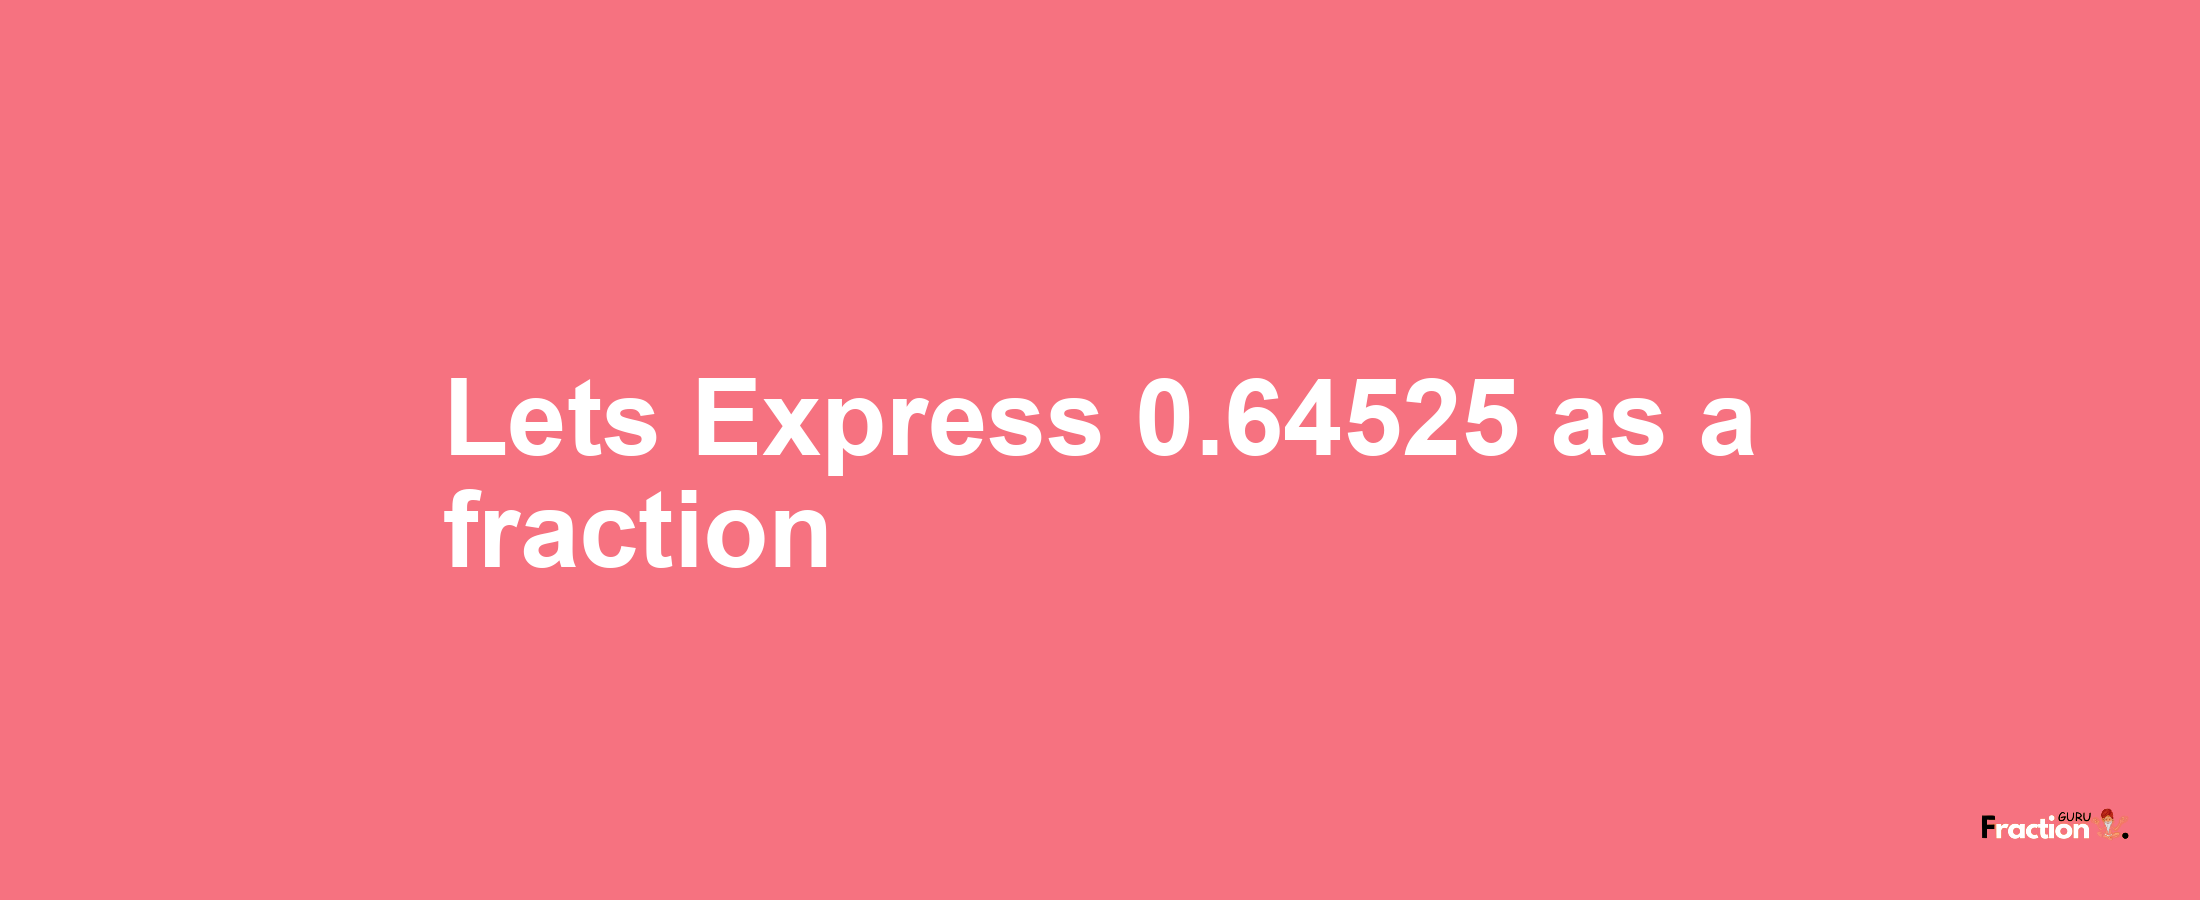 Lets Express 0.64525 as afraction